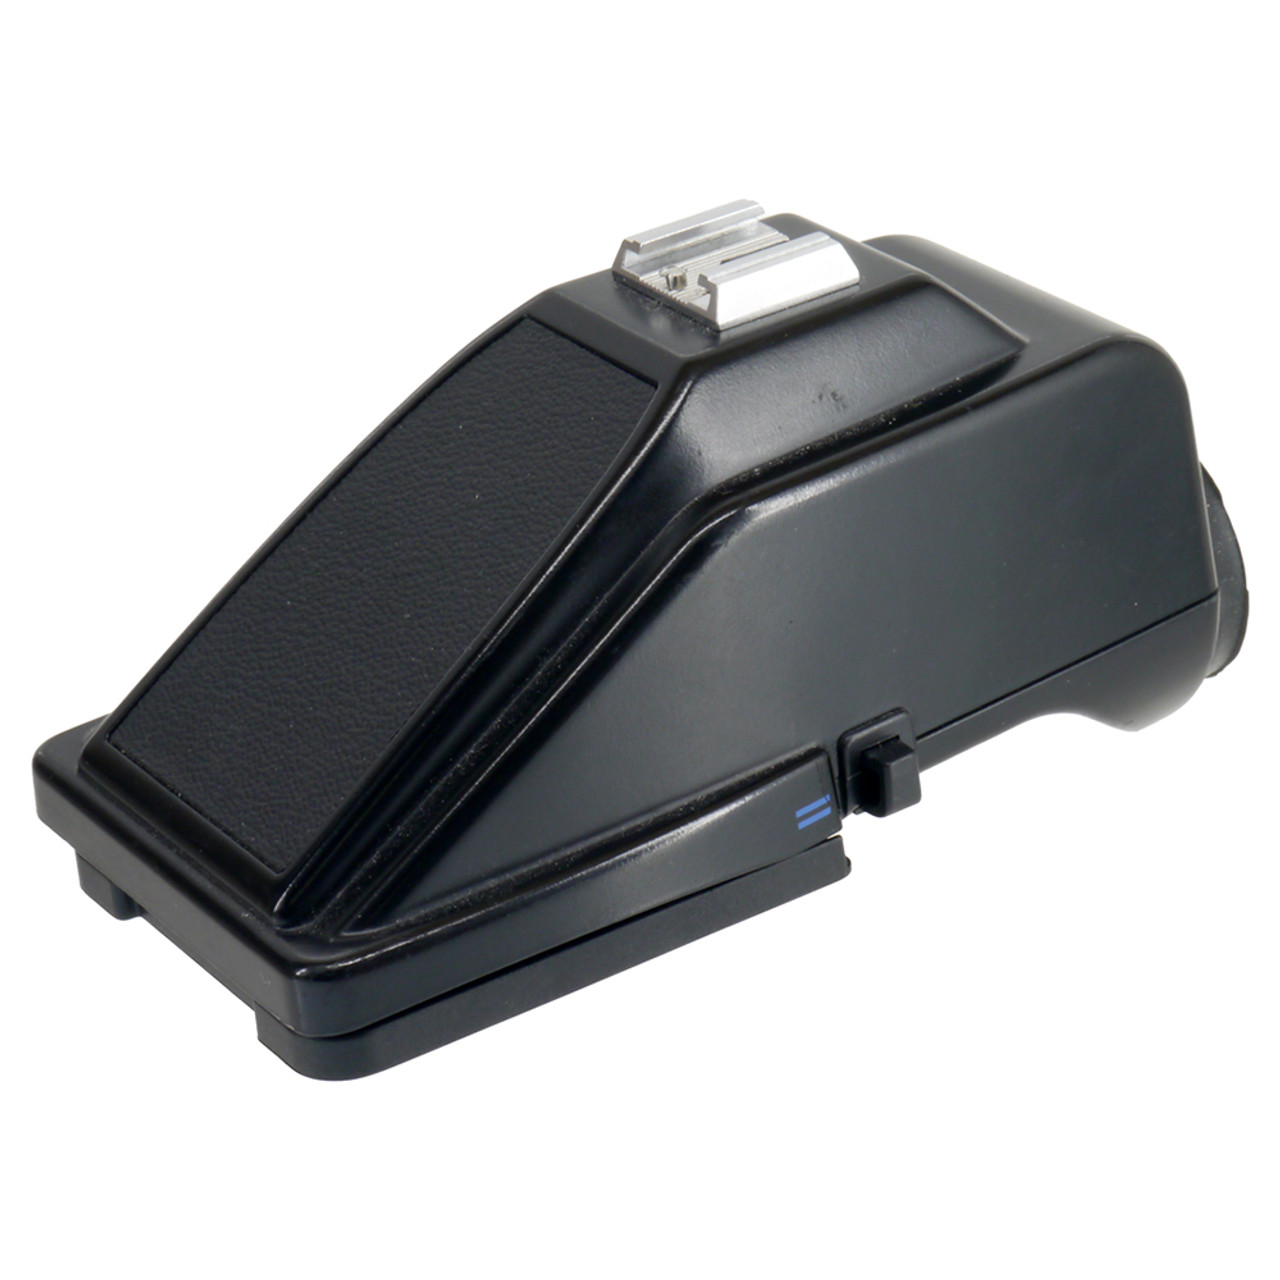 USED HASSELBLAD PM90 PRISM FINDER